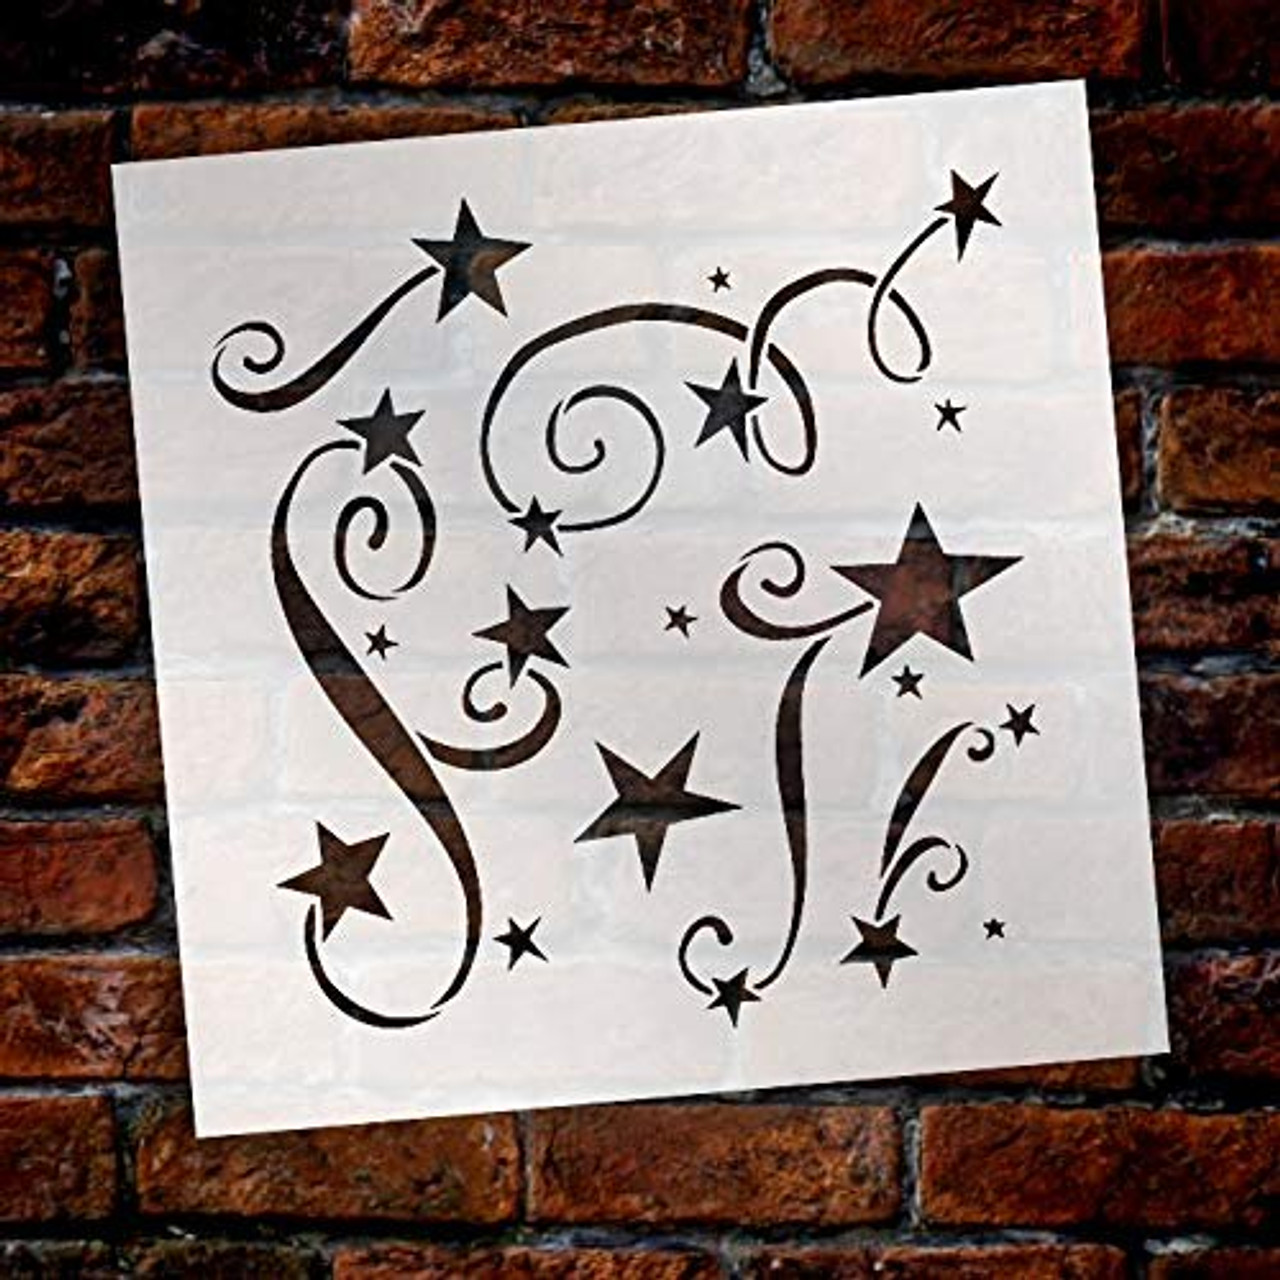 Holiday Stars Pattern Stencil by StudioR12 | DIY Christmas | Night Sky | Seasonal Gift | Craft Home Decor | Reusable Mylar Template | Paint Wood Sign - Select Size